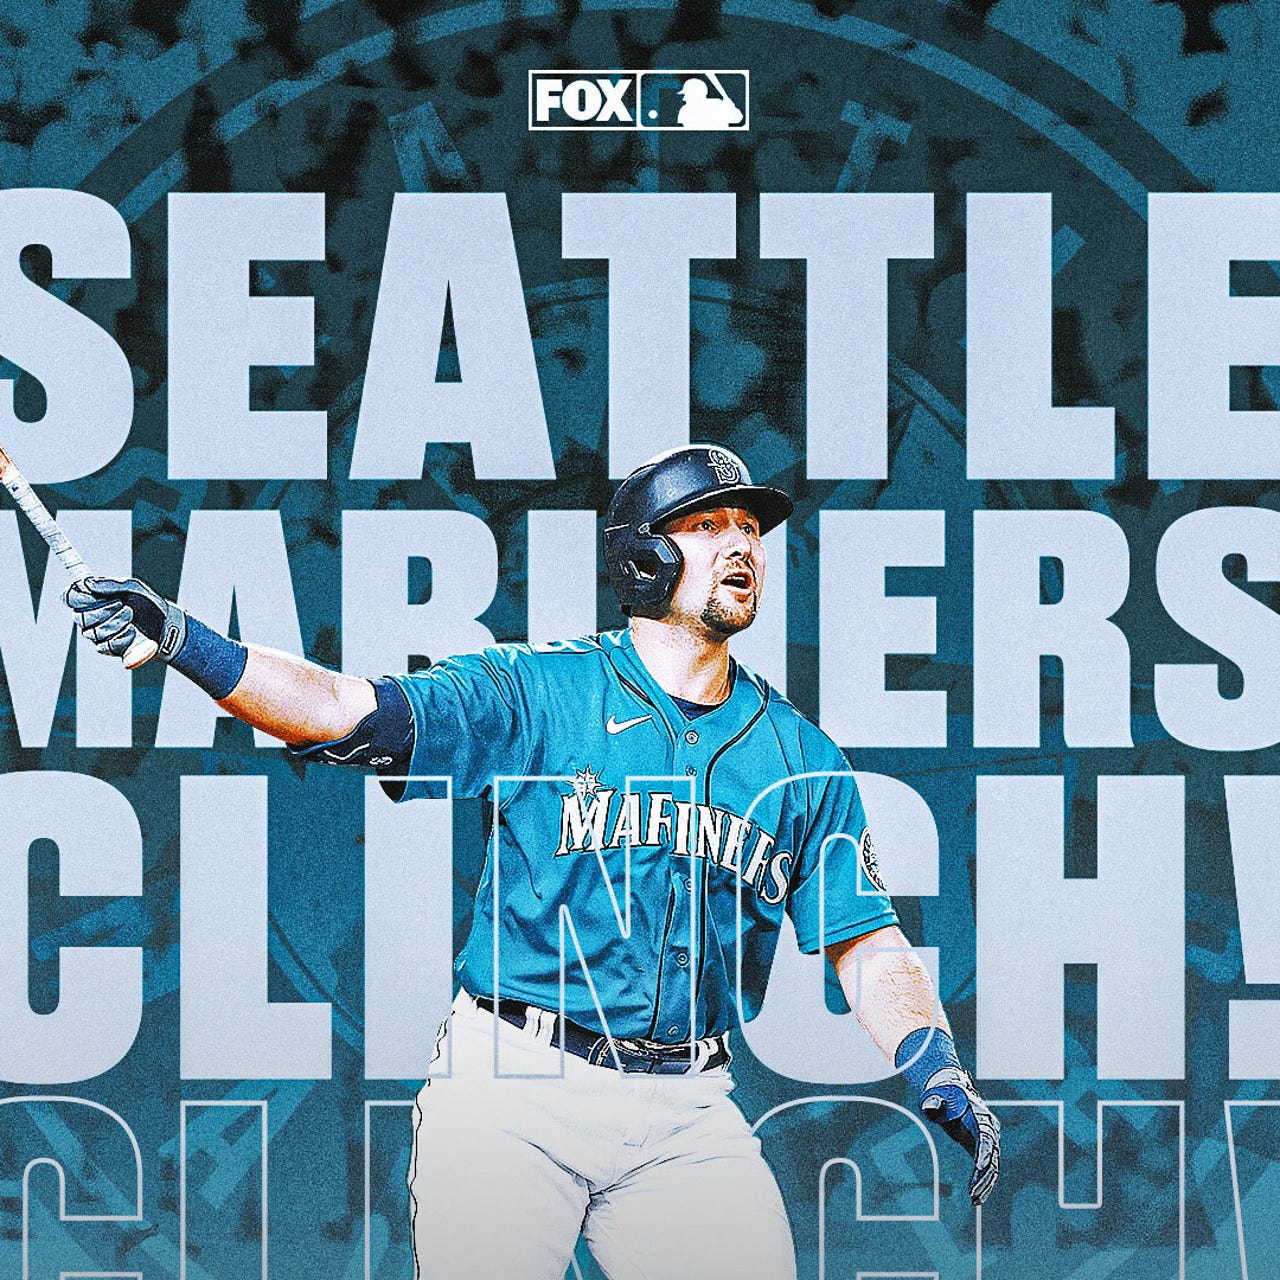 Mariners clinch 1st postseason berth since 2001 with Raleigh's walk-off HR